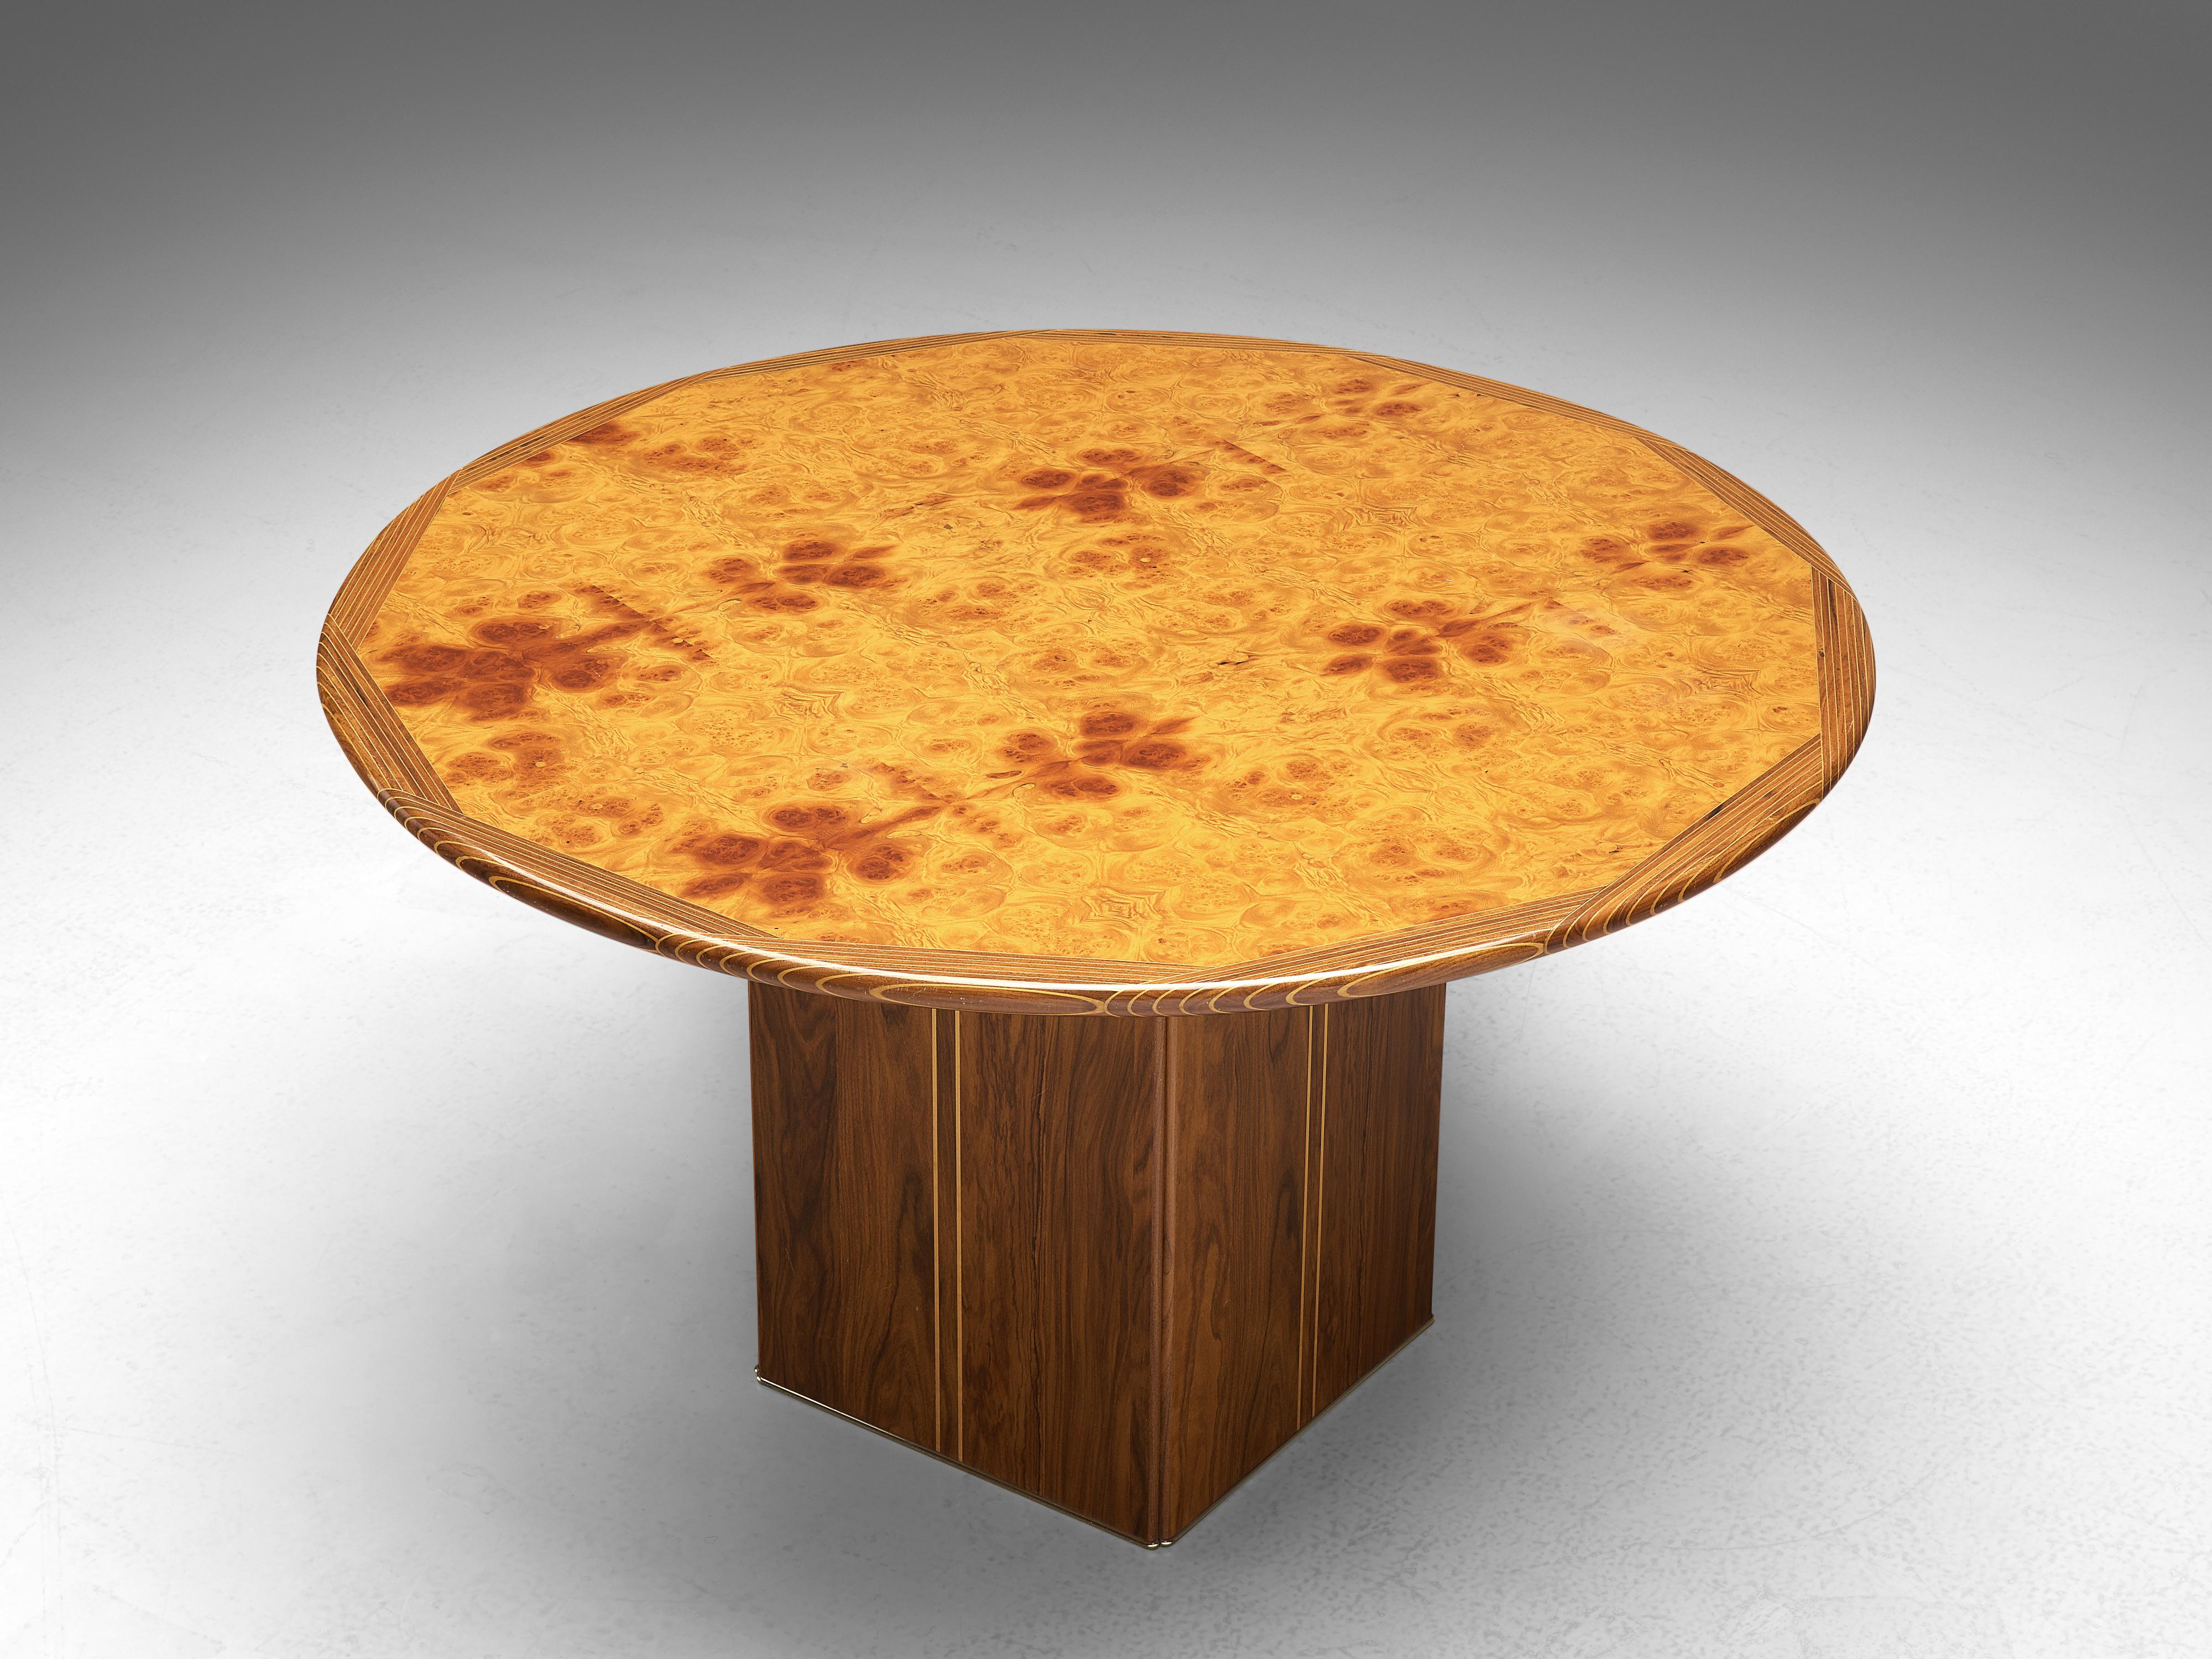 Afra & Tobia Scarpa for Maxalto, round dining table model ‘Artona’, walnut, walnut burl, Italy, 1975

The table was designed by Afra & Tobia Scarpa within the ‘Artona’ line for Maxalto. On a squared pedestal base rests a round tabletop. The top